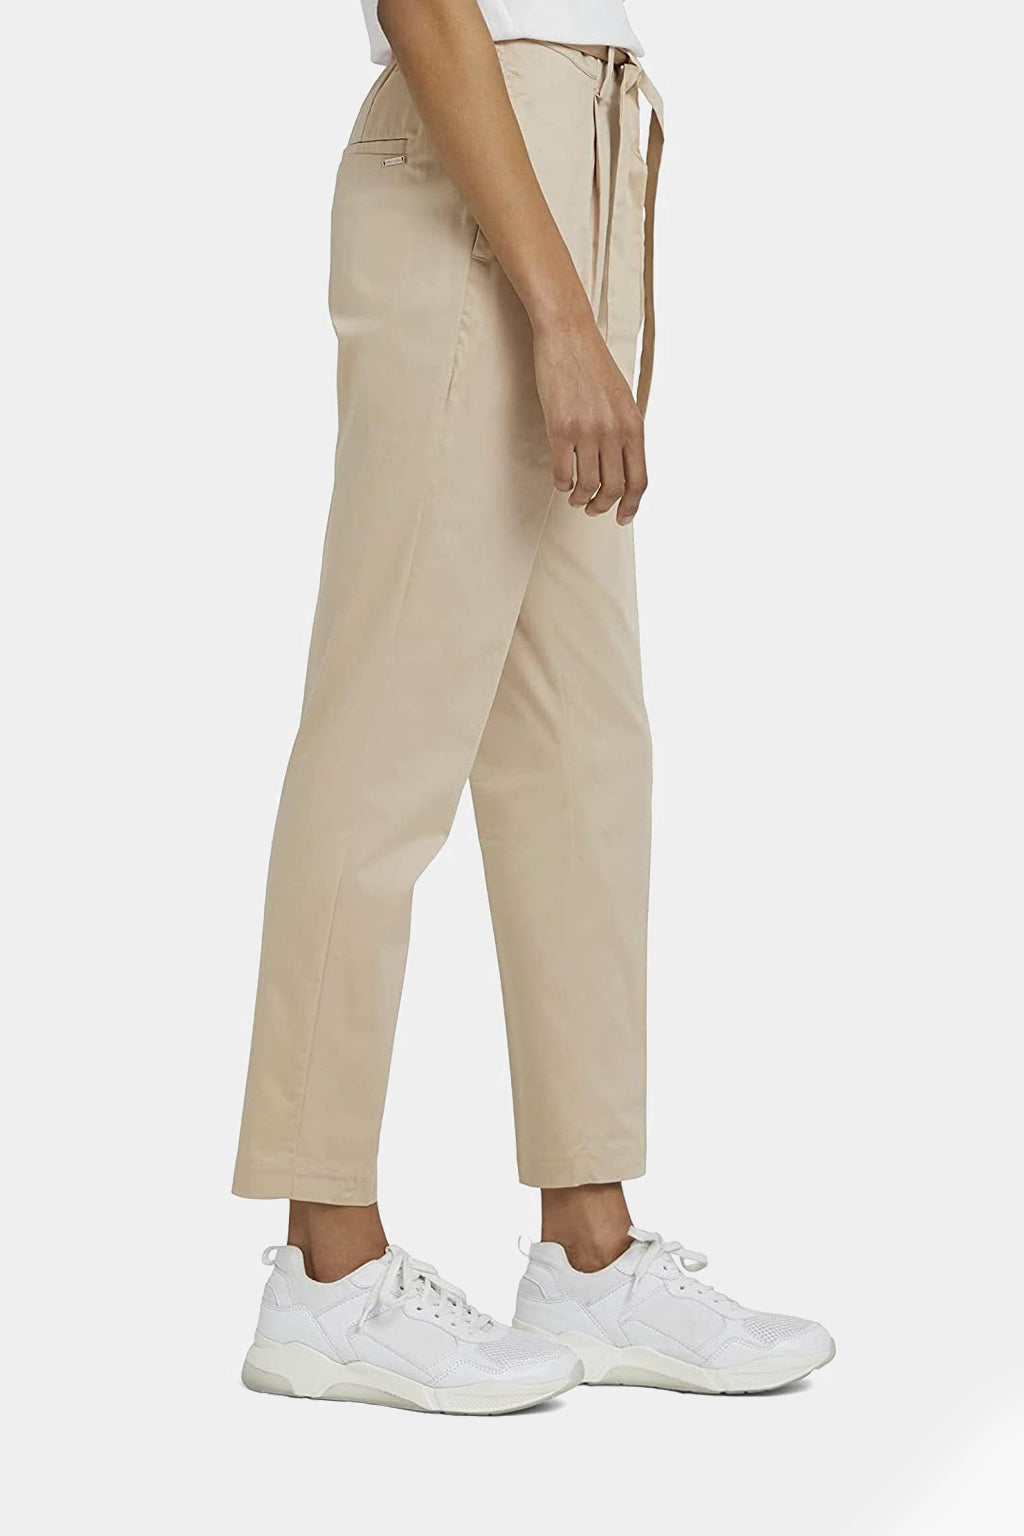 Tom Tailor - Nine To Five Women's Business Trouser